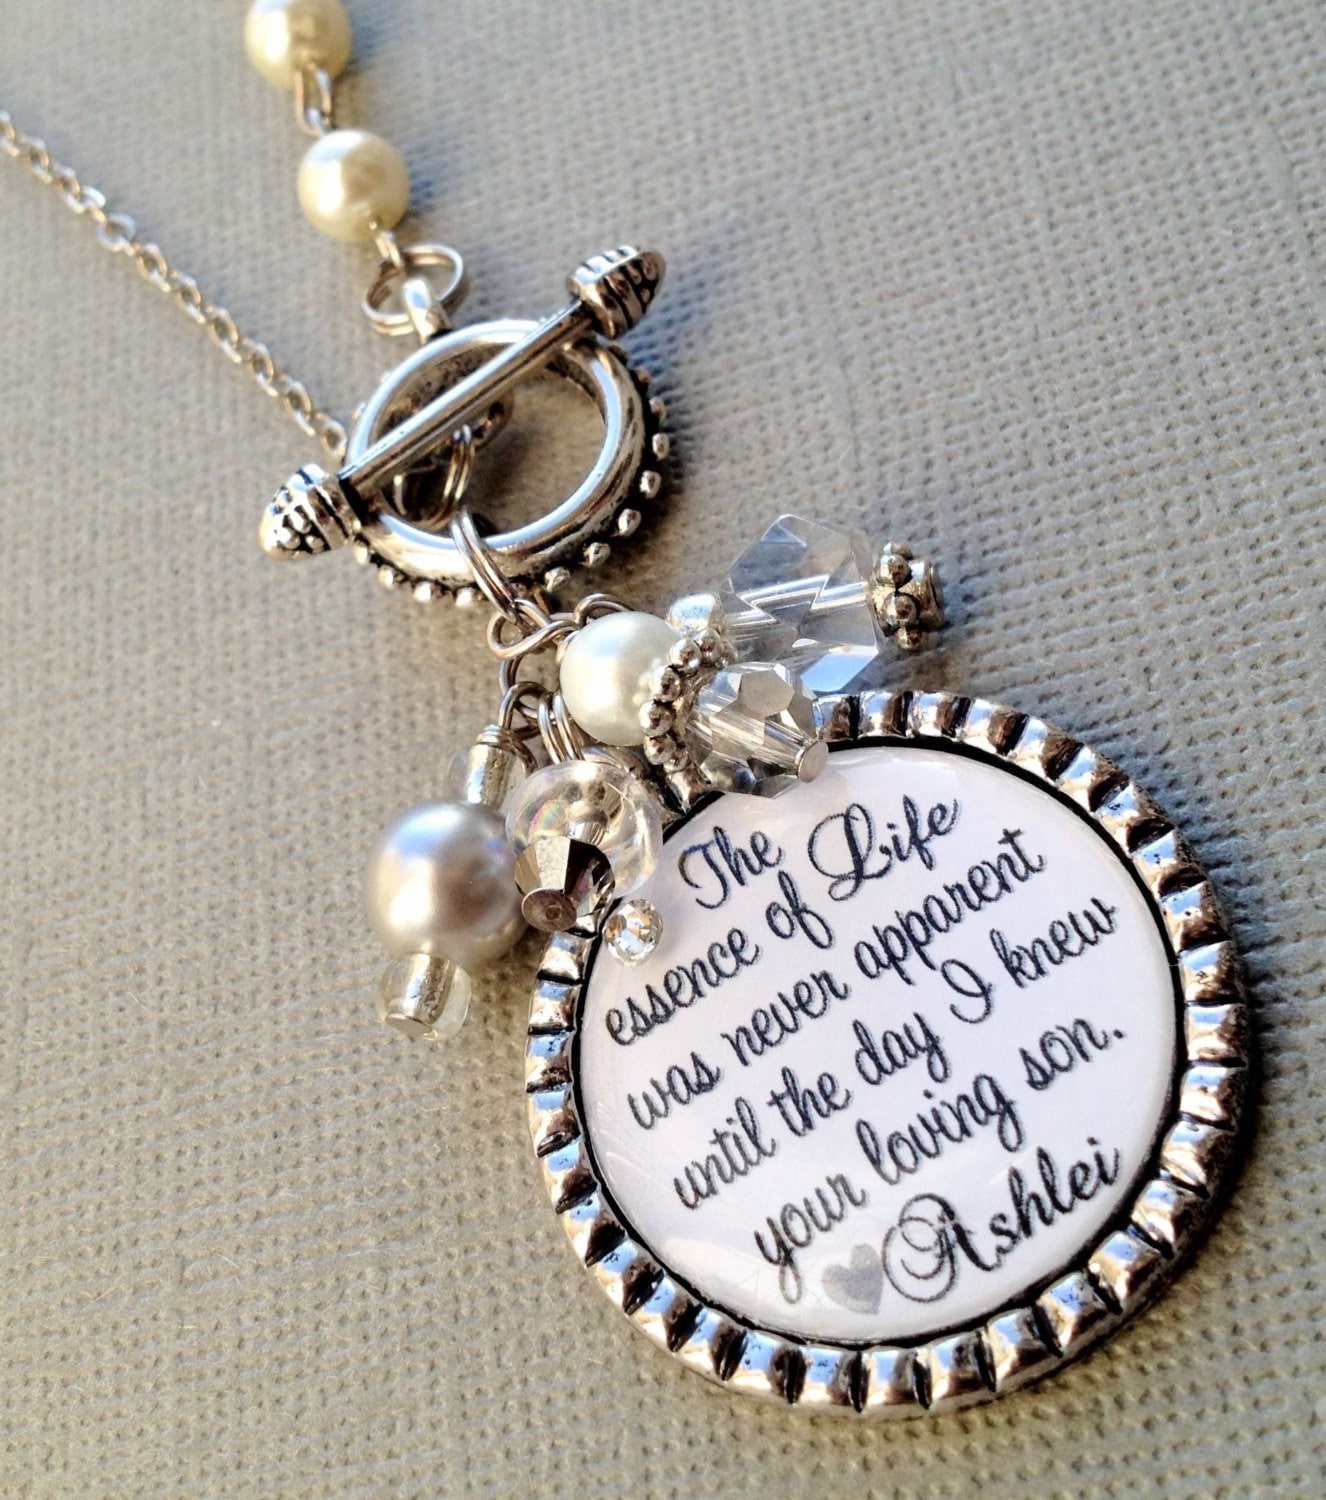 MOTHER of the GROOM gift- PERSONALIZED jewelry - essence of life, love between a mother and son, mother quote, thank you gift